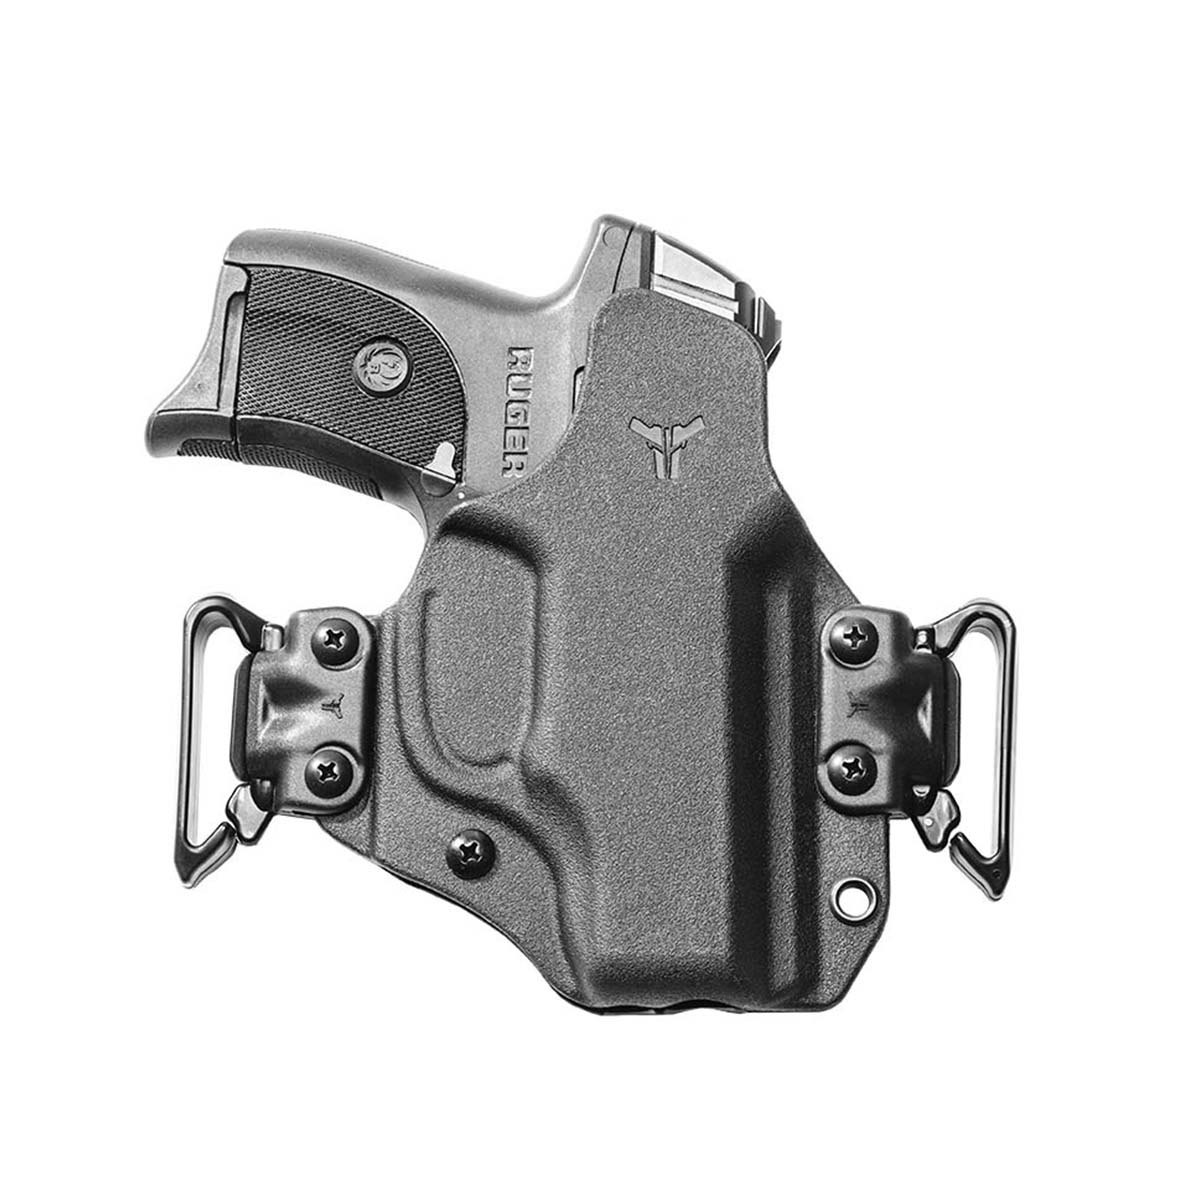  Drop Leg Platform - Thigh Rig by Blade-Tech for Holsters, Mag  Pouch, TASER, Leo and More : Sports & Outdoors